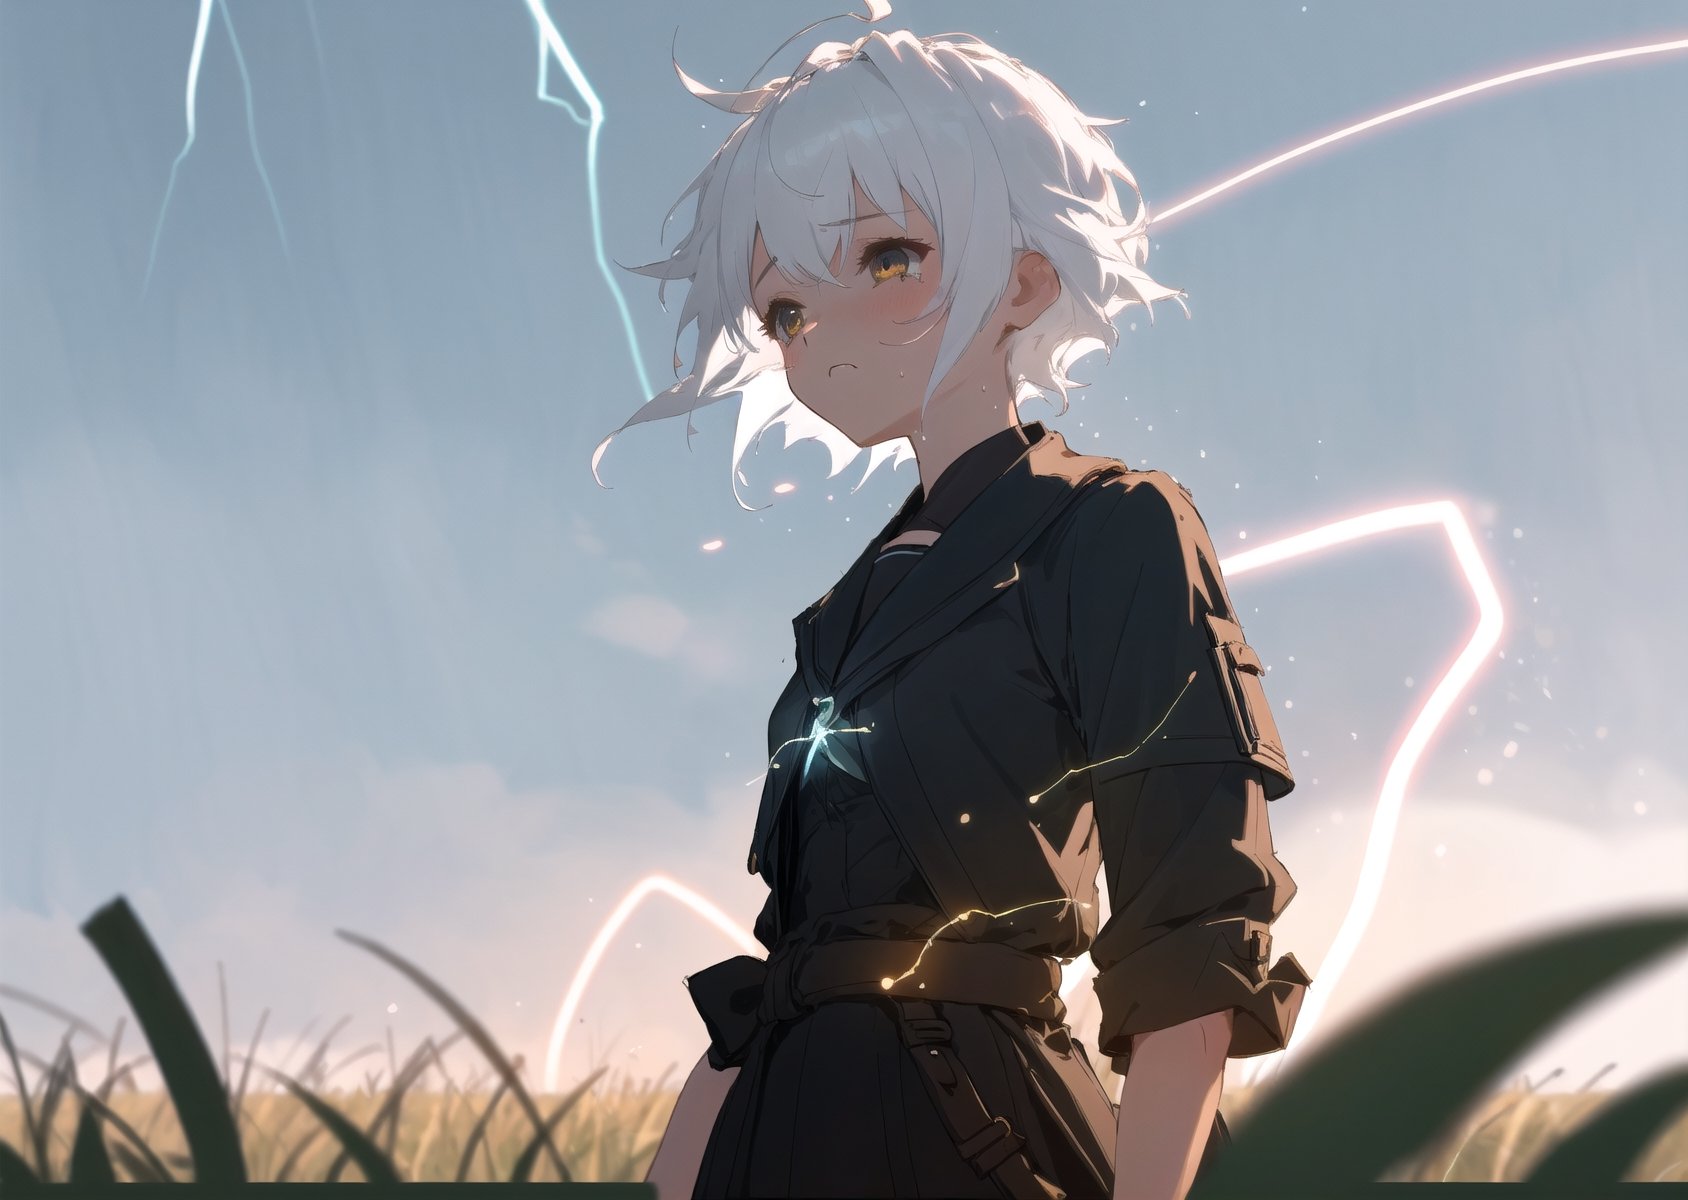 guiltys, sad_face, a girl, white hair, upper body, deal with it, (bokeh:1.1), depth of field, tracers, vfx, splashes, lightning, light particles, electric, white background, short hair,  grass landscape background, a girl in the distance, women
